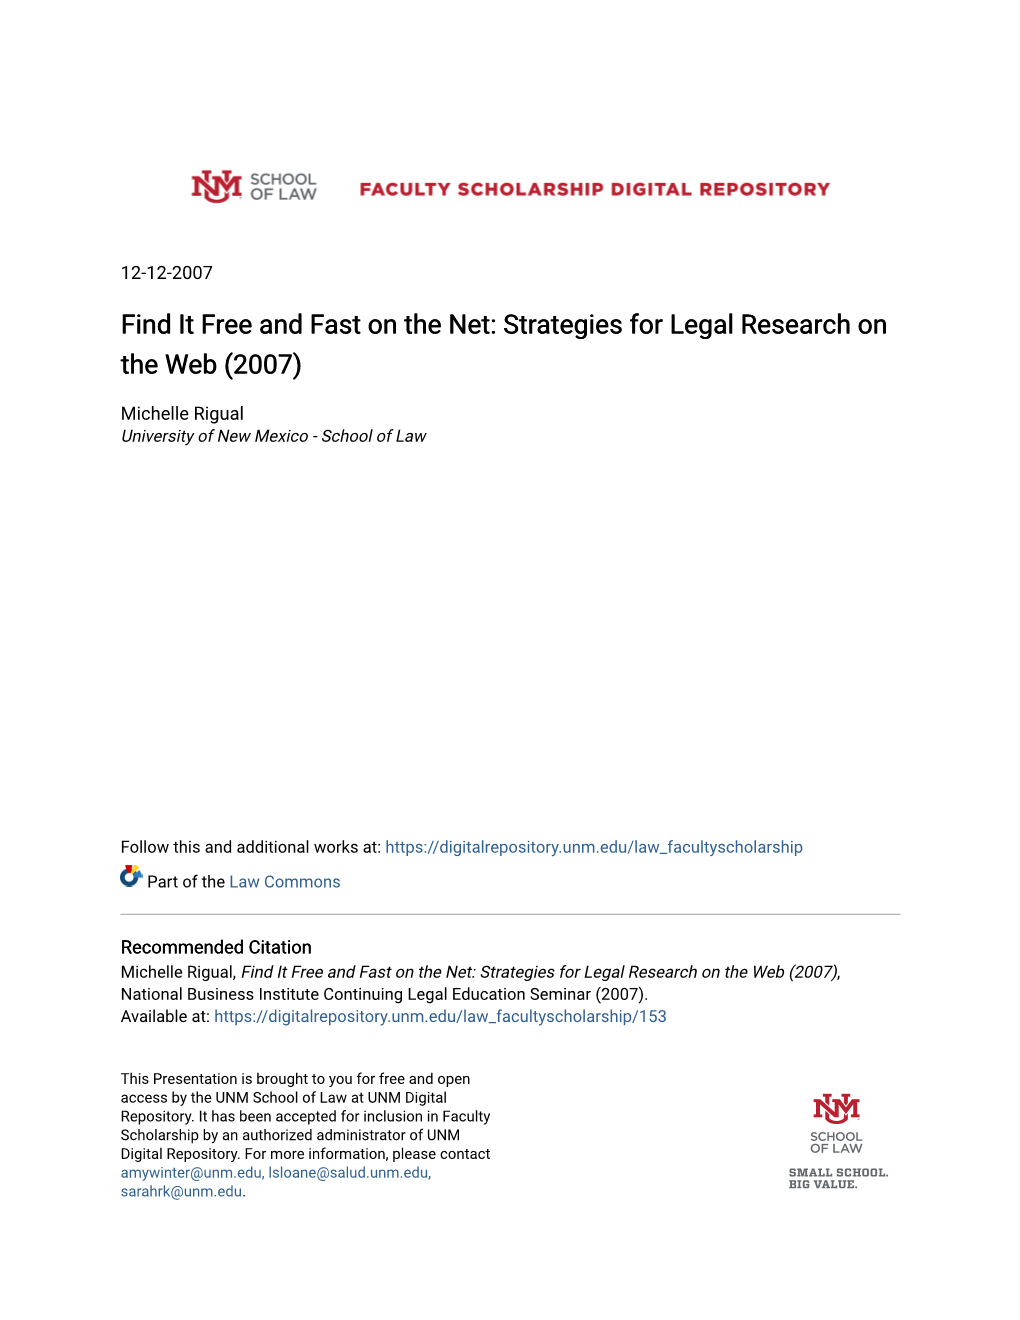 Strategies for Legal Research on the Web (2007)